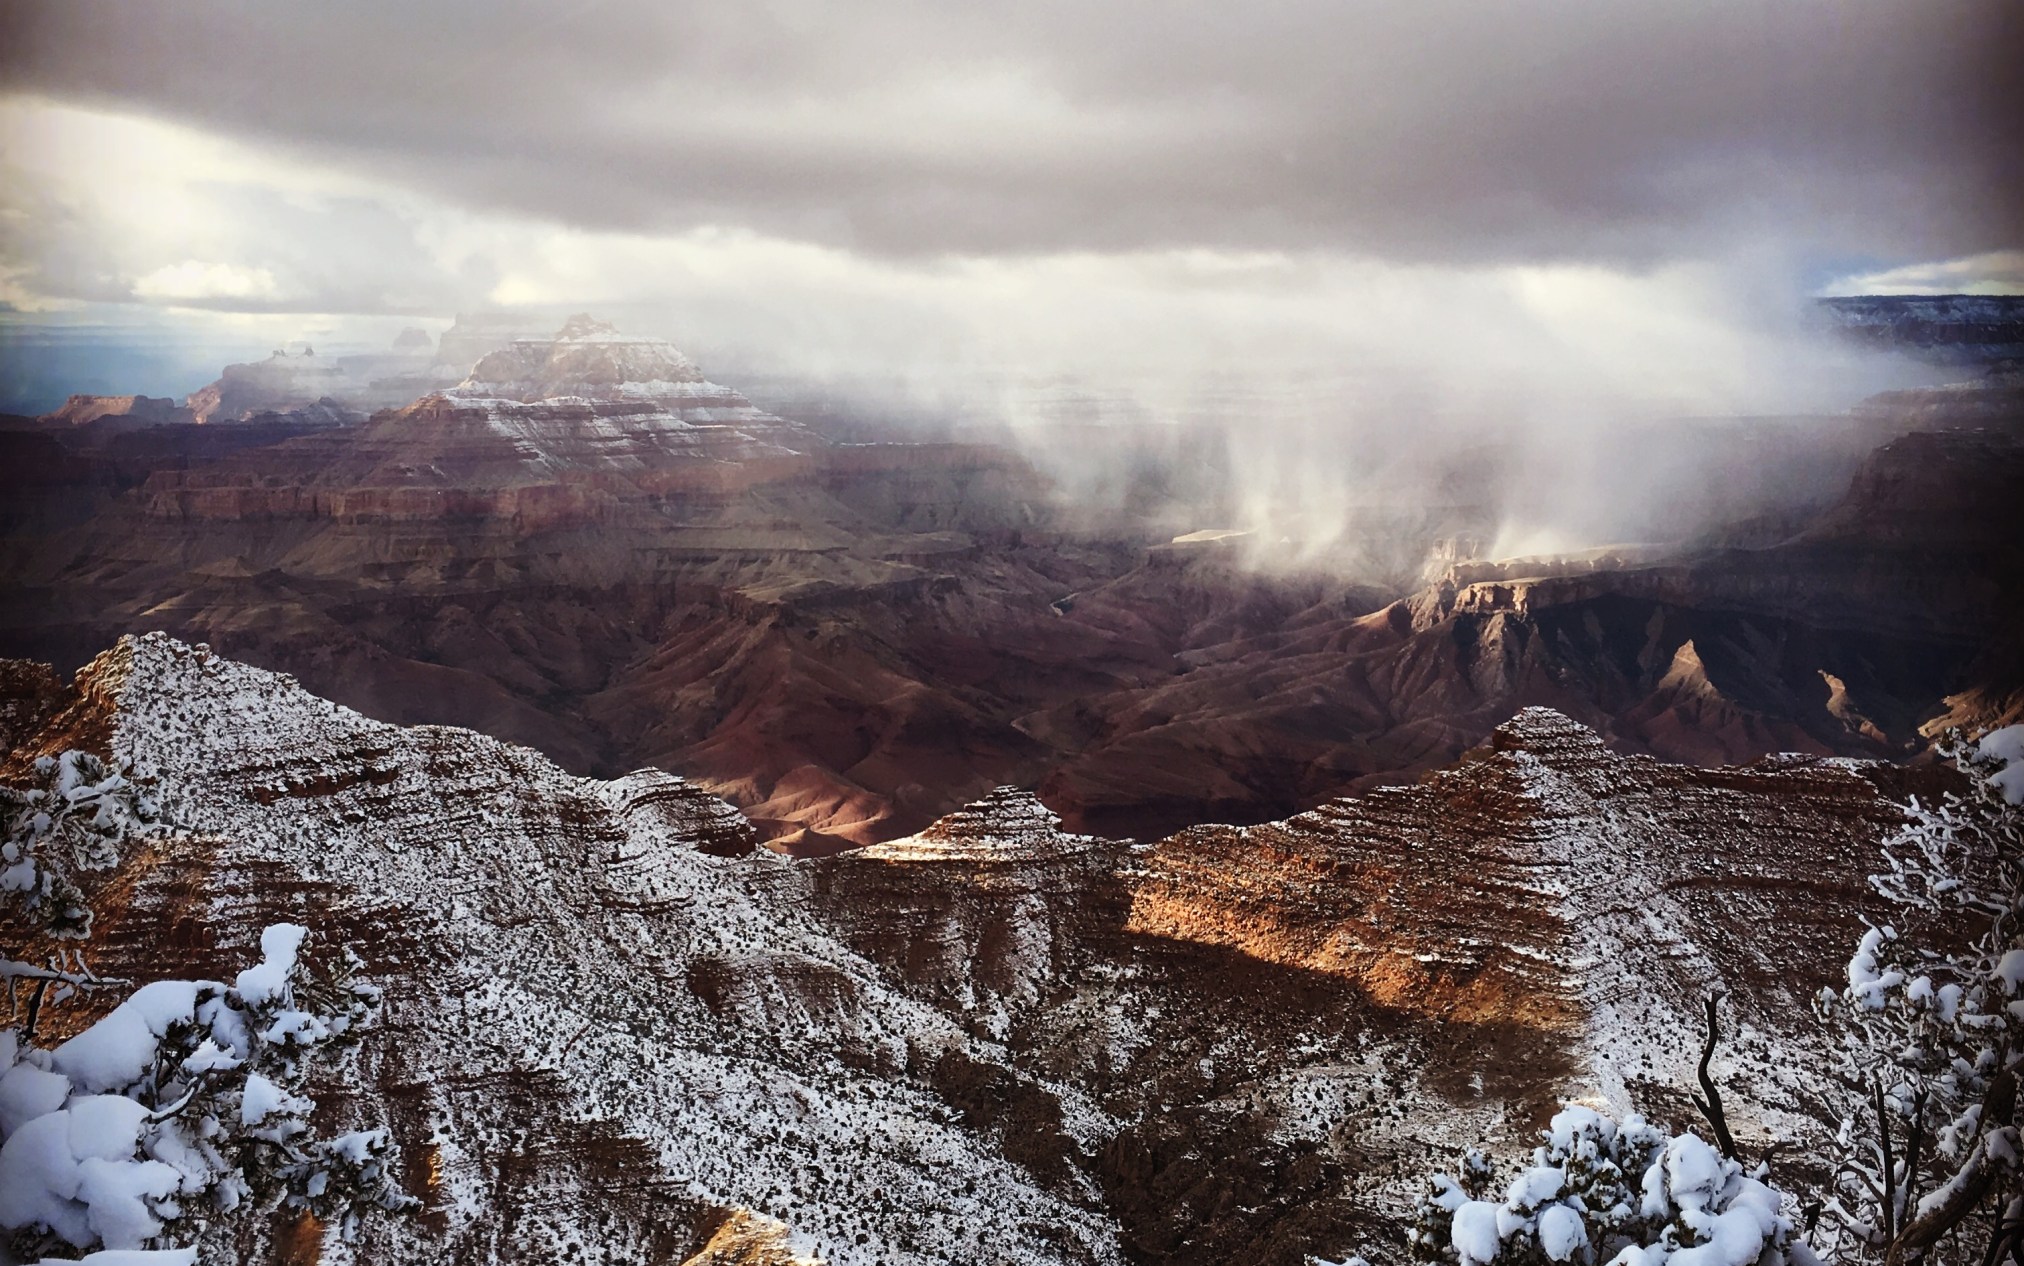 11a snowstorm dusting the rocks of the grand canyon